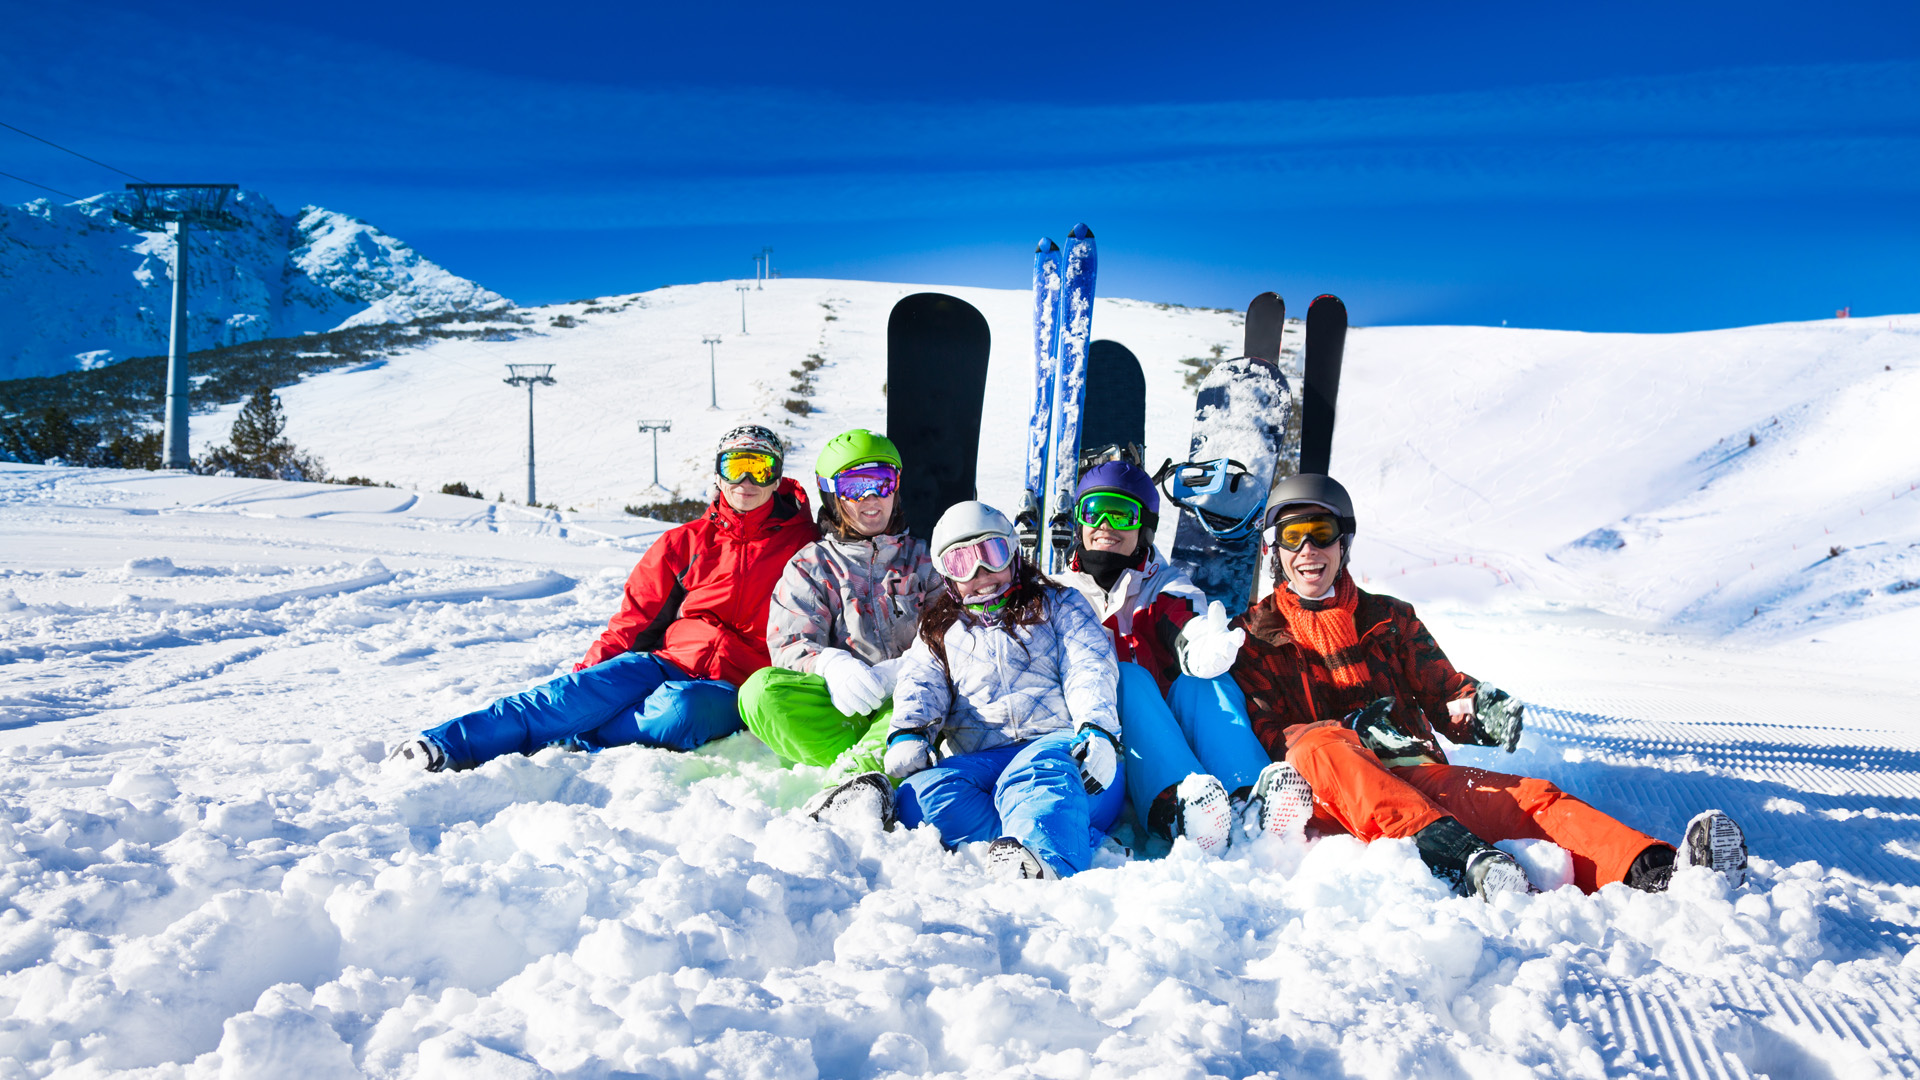 THE BEST CHOICE FOR MAINE SKI TRIPS